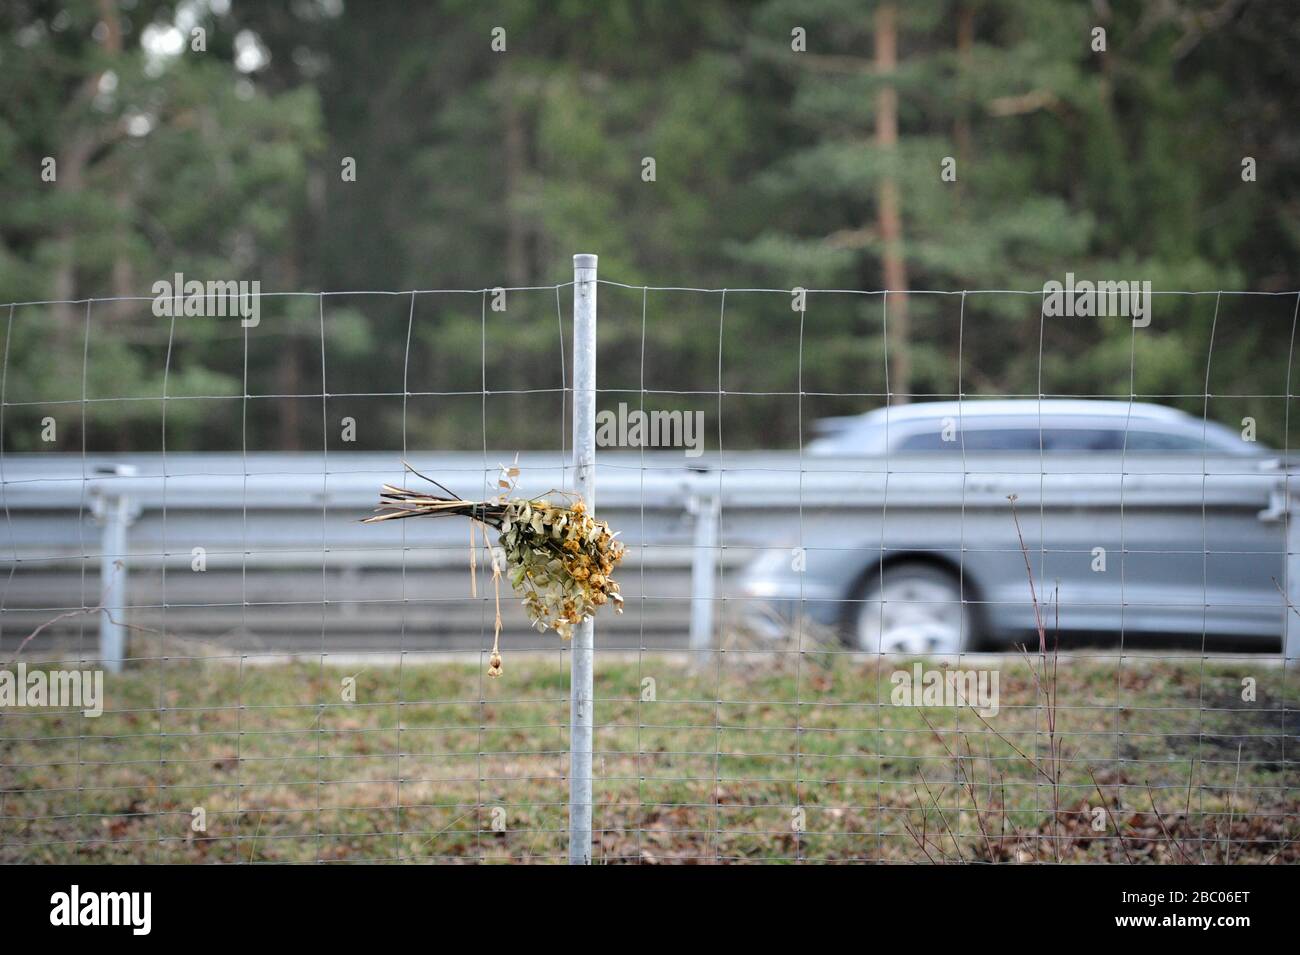 On the way on the A95 from Munich towards Garmisch. A lot of accidents happen on this route, which is very popular with Rasern. At the fence that separates the Olympic road from the motorway, someone has put up flowers to commemorate the accident victim. [automated translation] Stock Photo